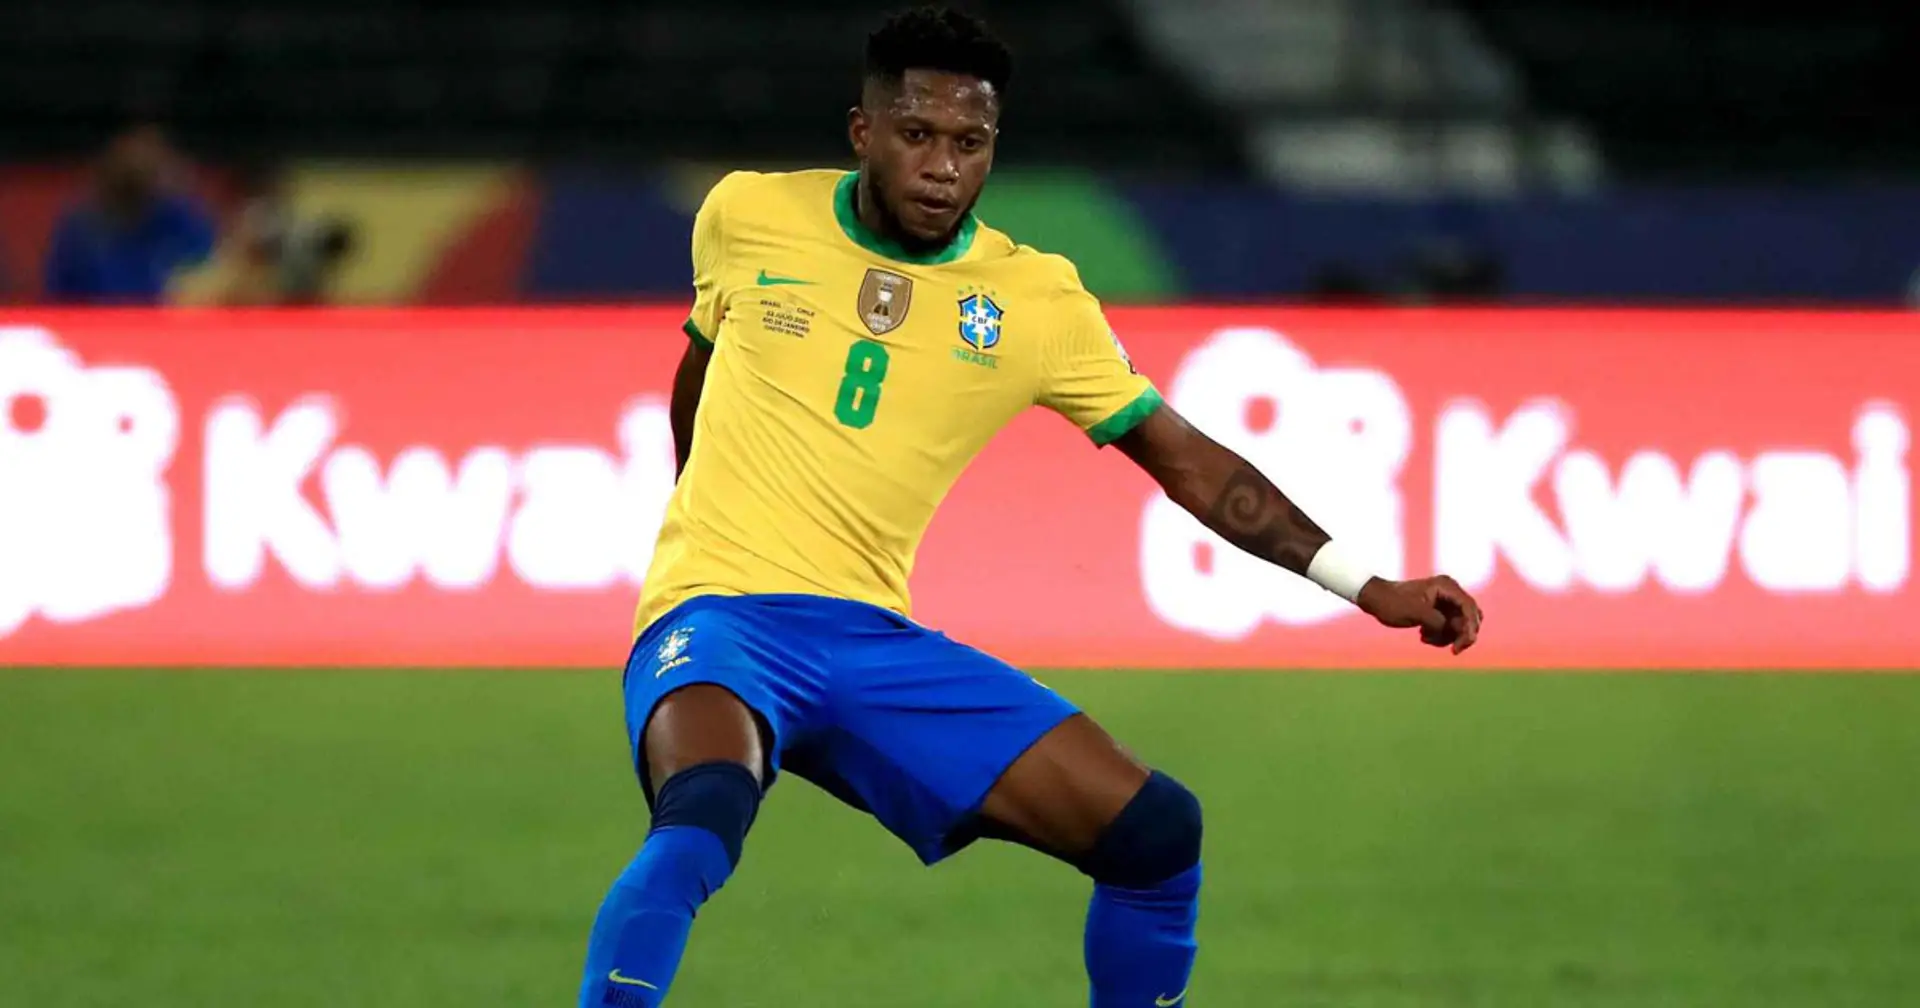 86.2% passing accuracy, 4 interceptions: Fred helps Brazil to Copa America final with another commendable performance